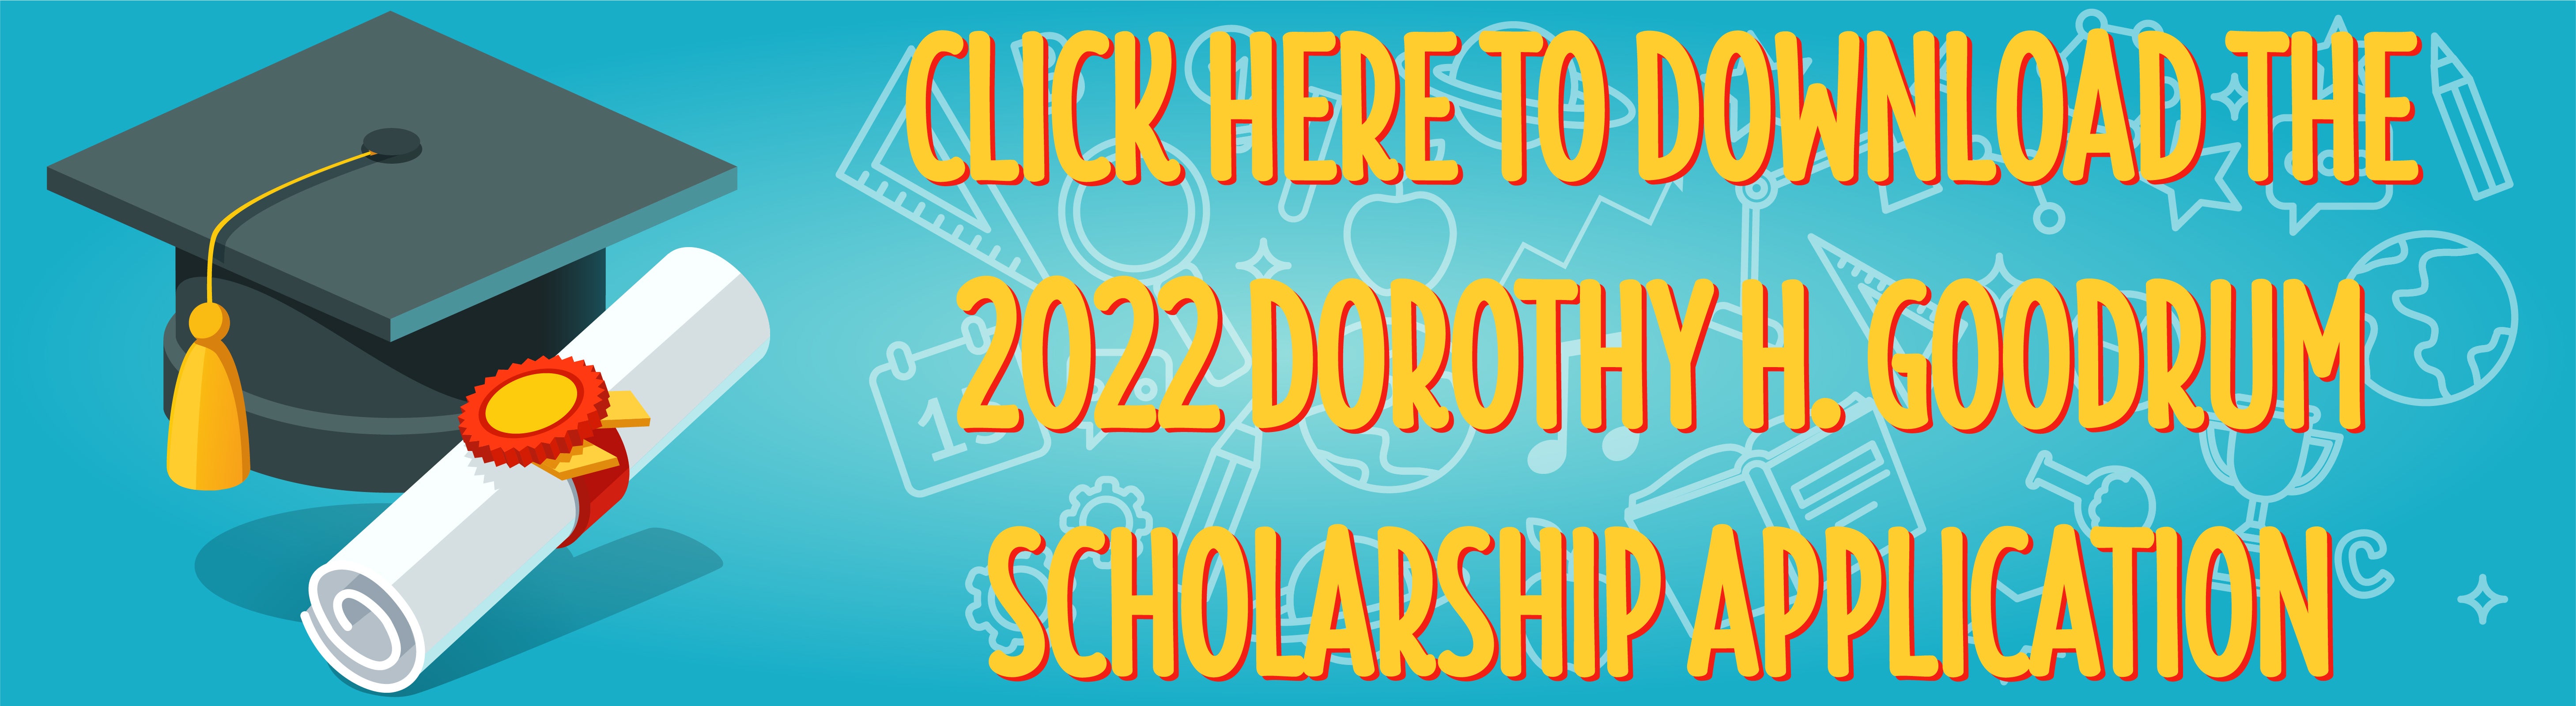 Click to download the 2022 Dorothy H. Goodrum Scholarship Application